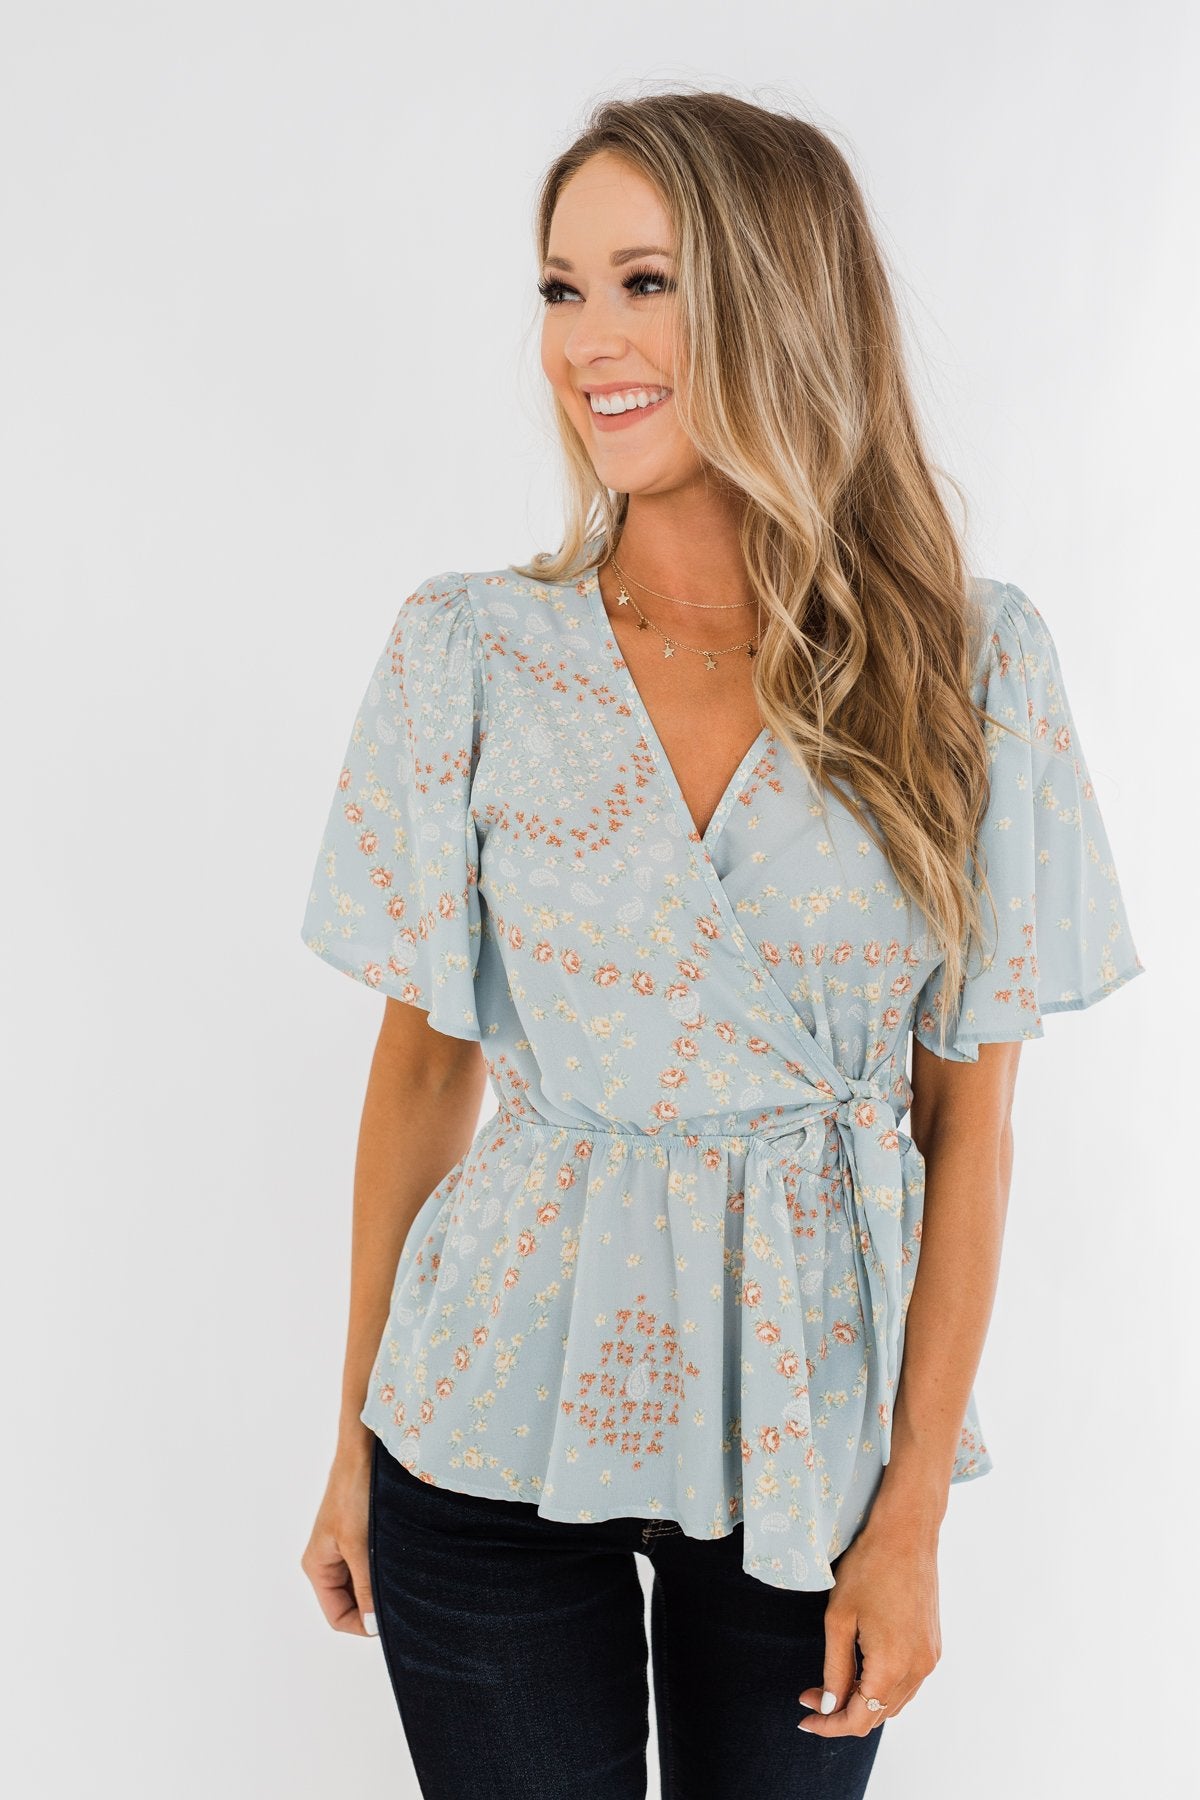 The Things You Say Floral Wrap Top- Light Blue